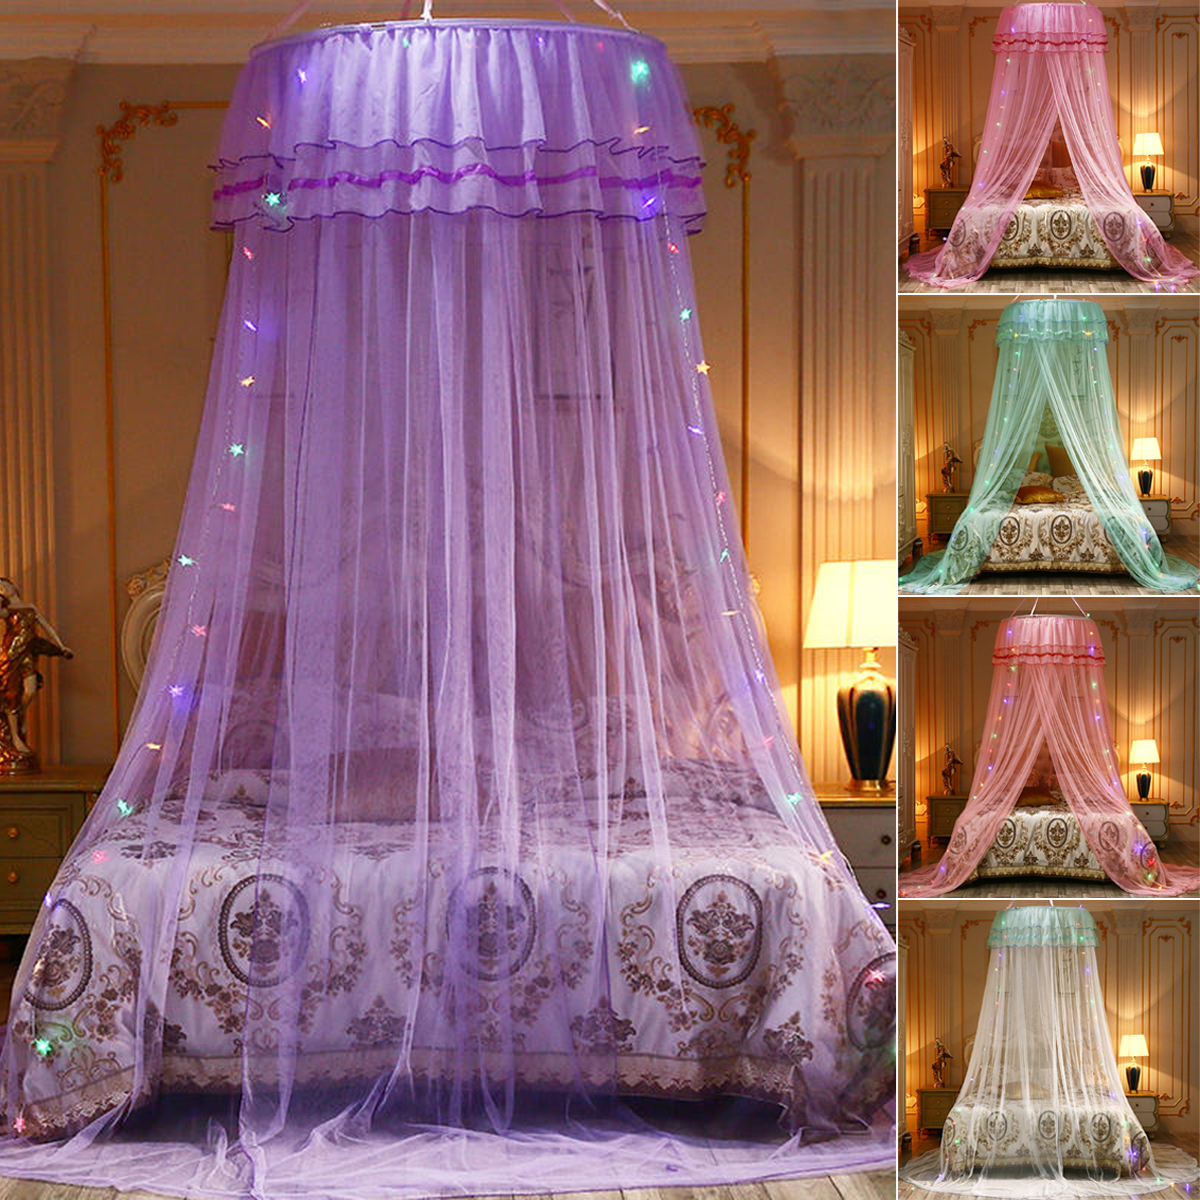 Mosquito-Net-Bedding-Lace-LED-Light-Princess-Dome-Mesh-Bed-Canopy-Bedroom-Decor-1682937-1